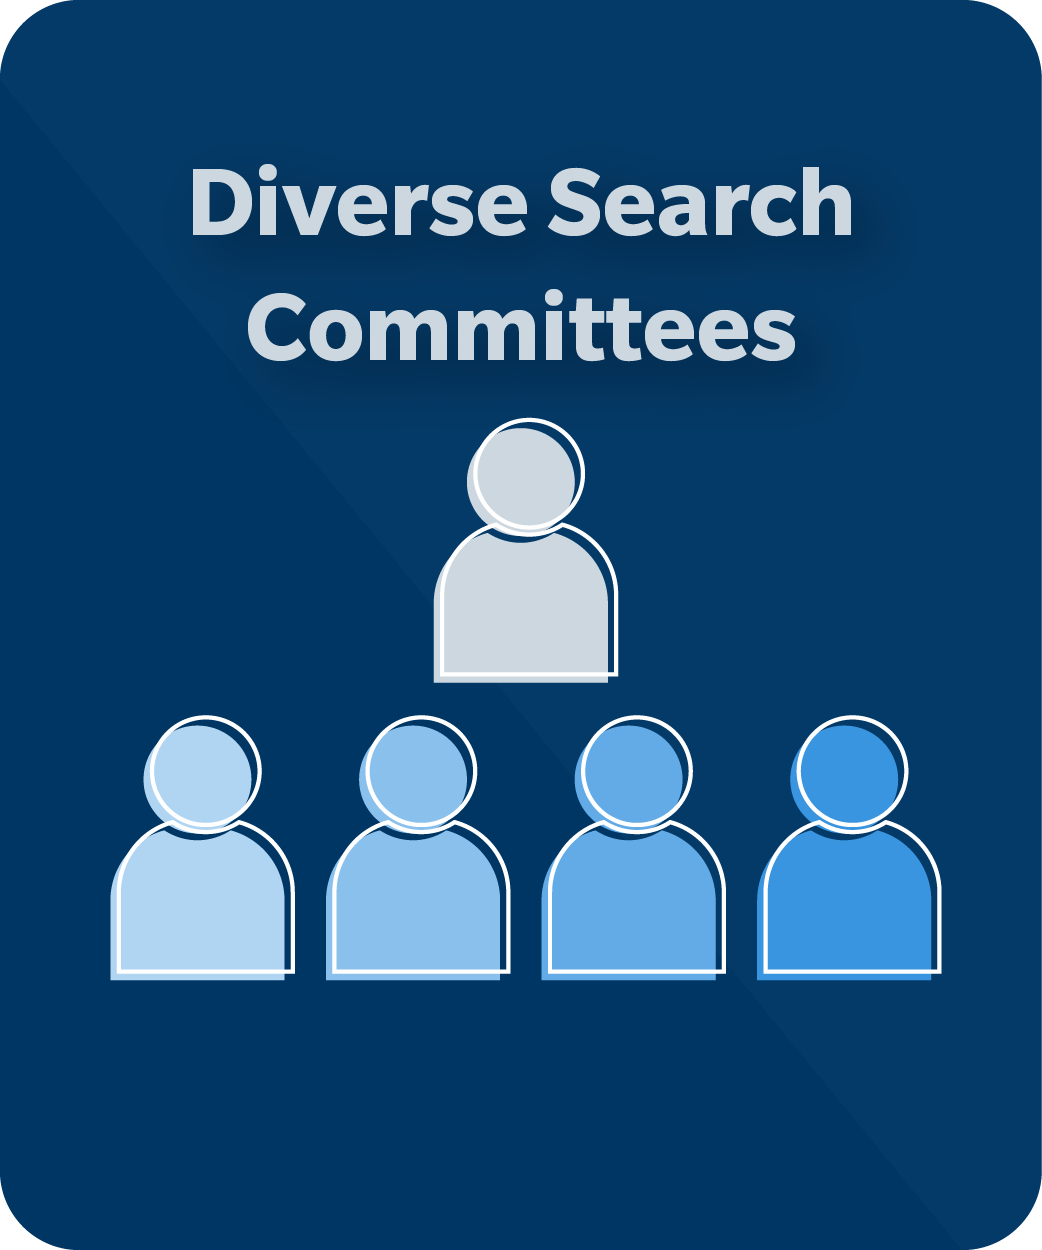 Diverse Search Committees, with icons of different shaded figurines 